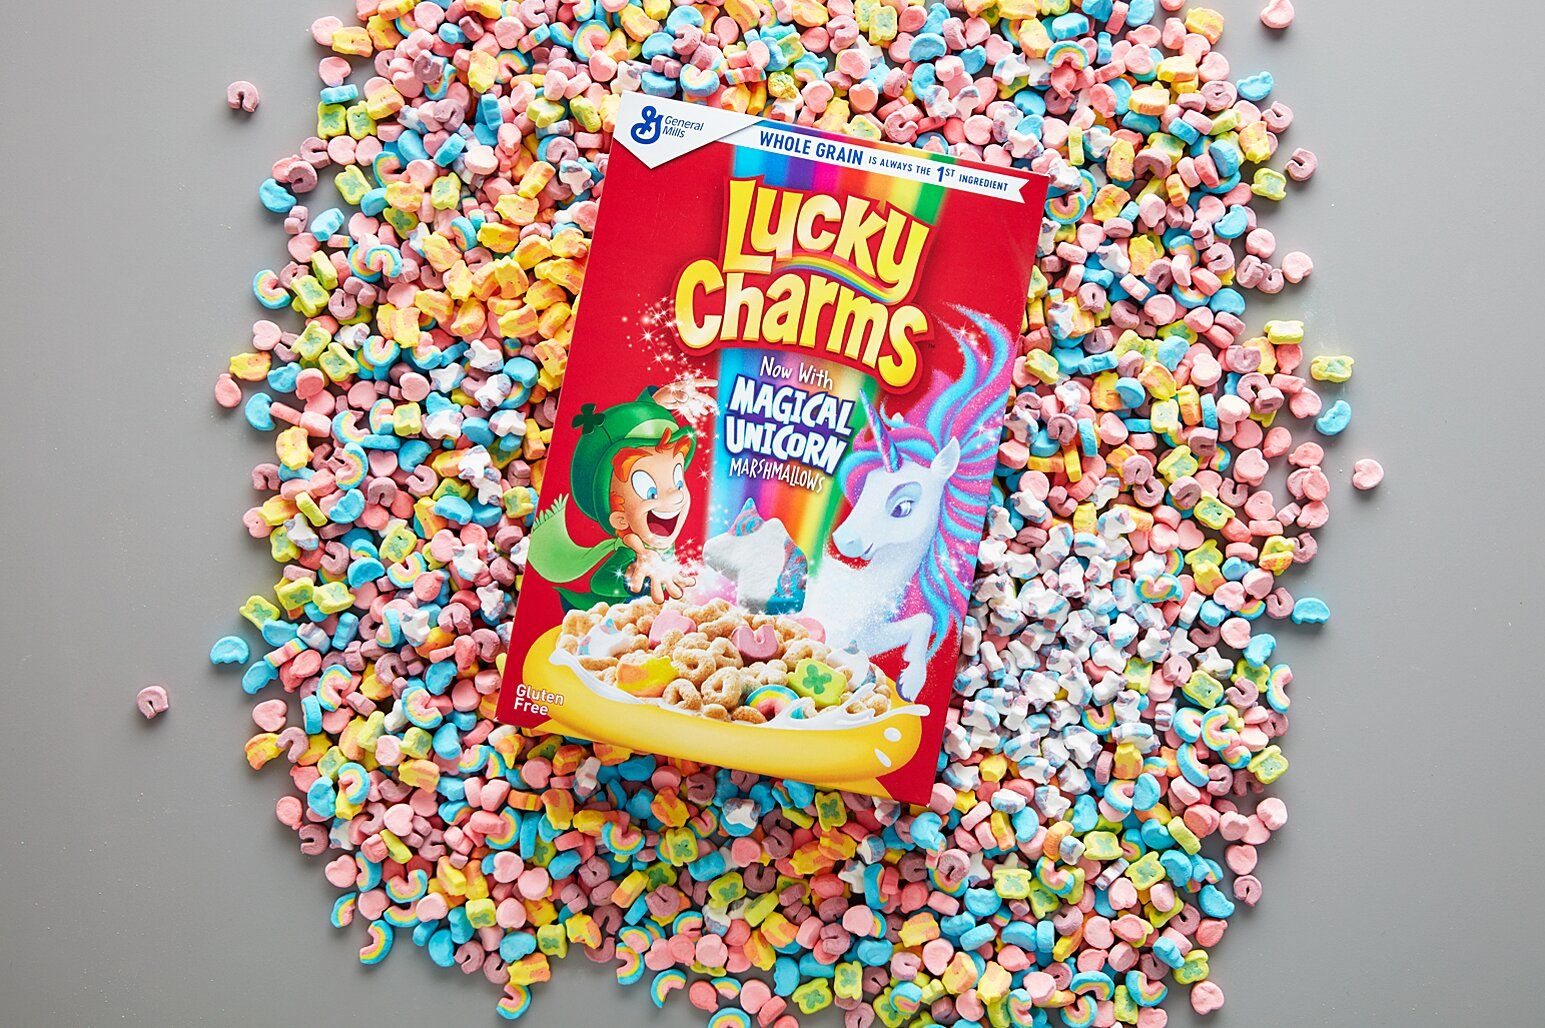 Lucky Charms Upgrades to 'Magical Unicorn' Marshmallows. Food & Wine